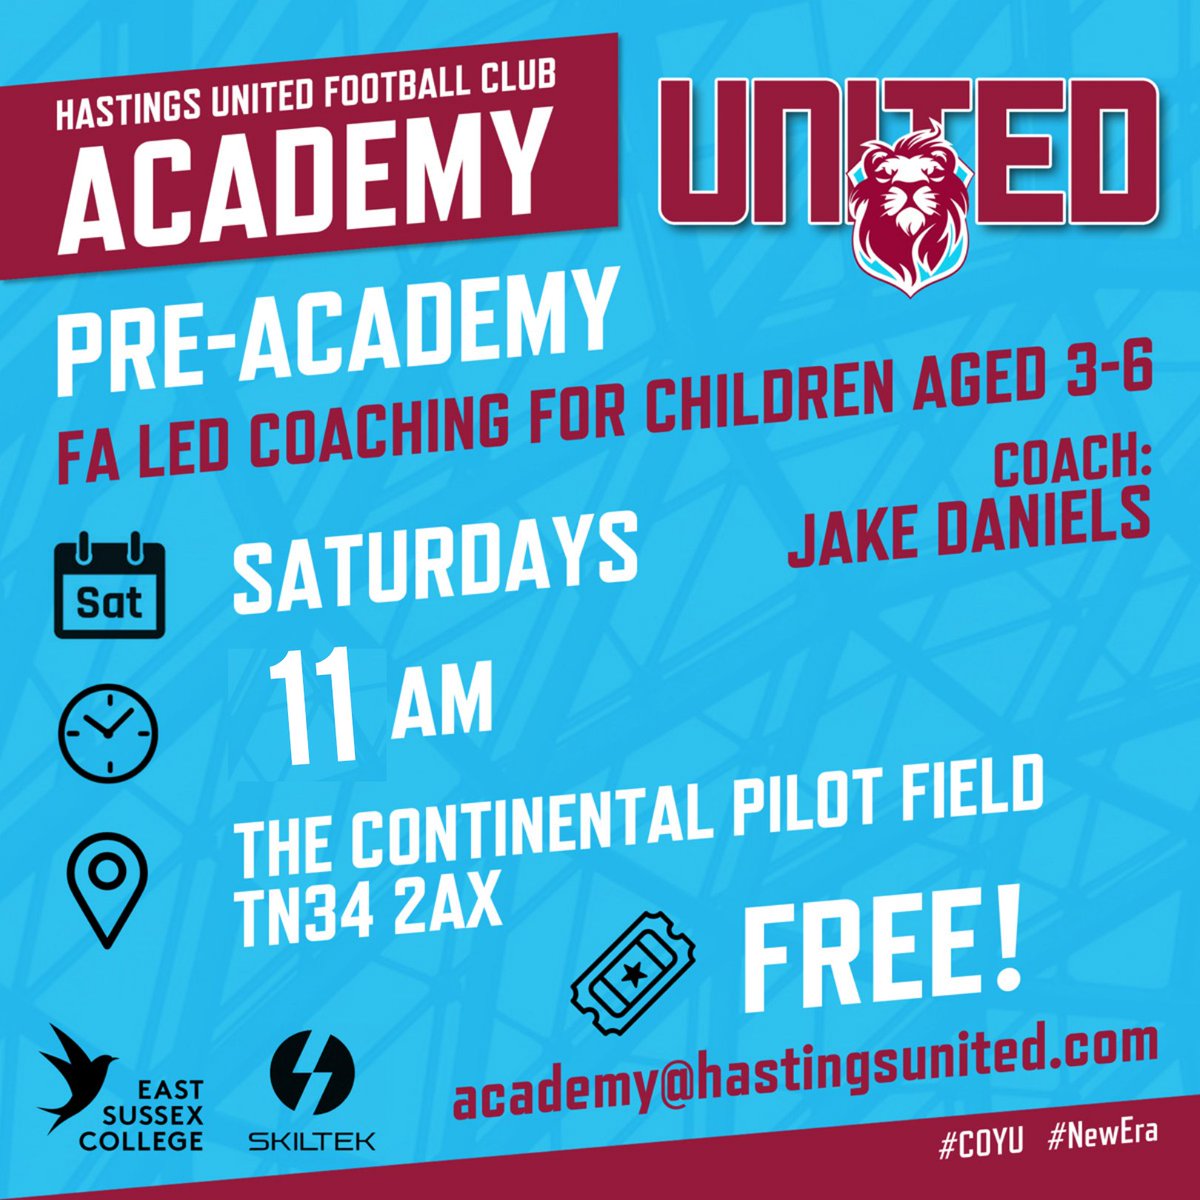 𝟭𝟭𝗔𝗠 - 𝗧𝗢𝗗𝗔𝗬 📅 TODAY ⏰ 11:00am 📍 THE CONTINENTAL PILOT FIELD 🎫 FREE (JUST TURN UP) FA led coaching for Children aged 3-6 with Jake Daniels For more information email academy@hastingsunited.com #COYU #HUFCPreAcademy #HUFC